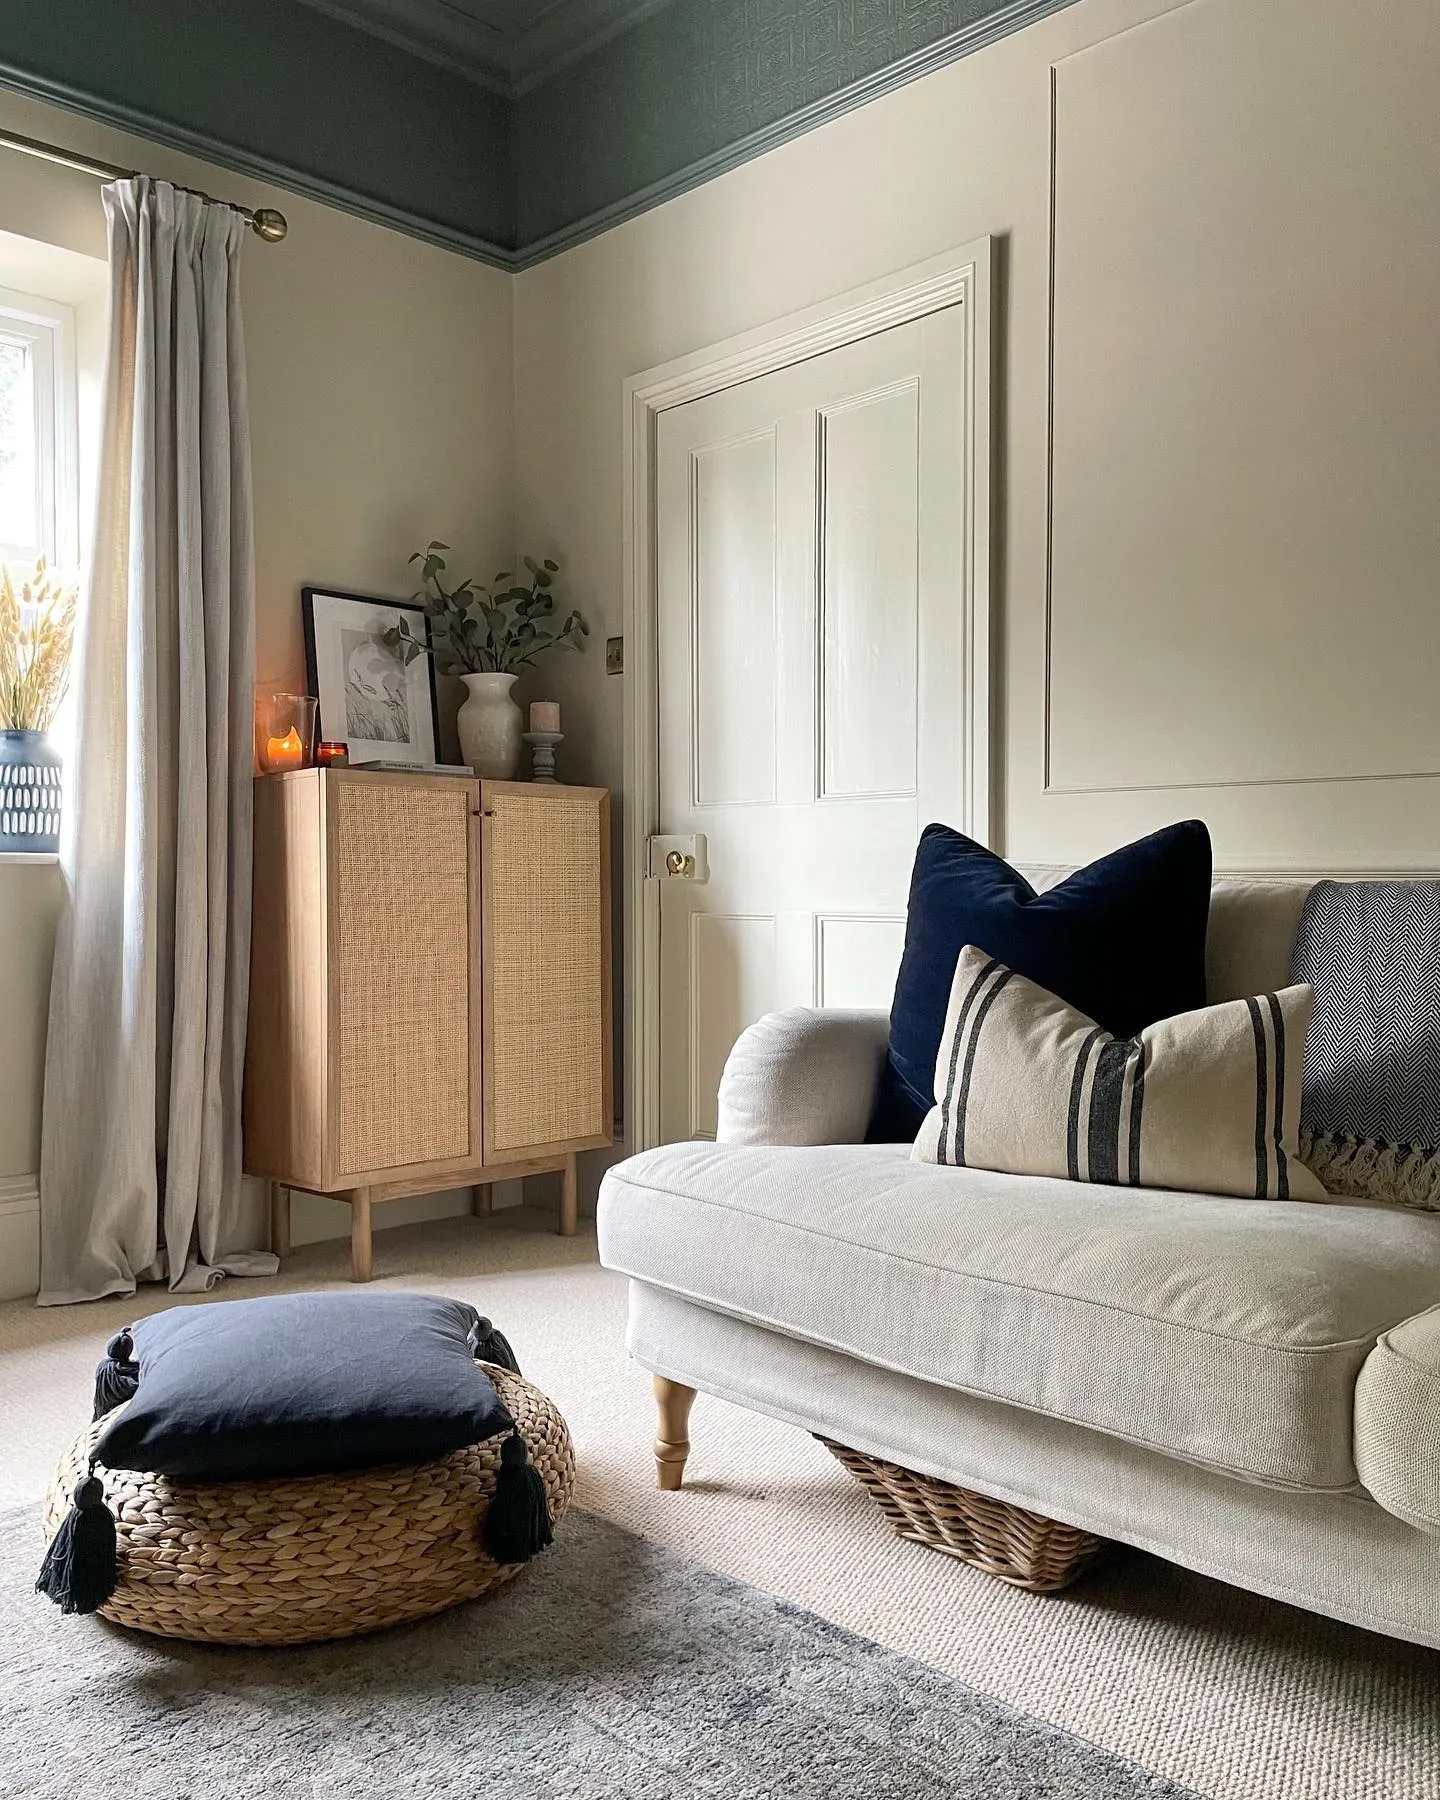 Dulux Raw Cashmere living room inspiration